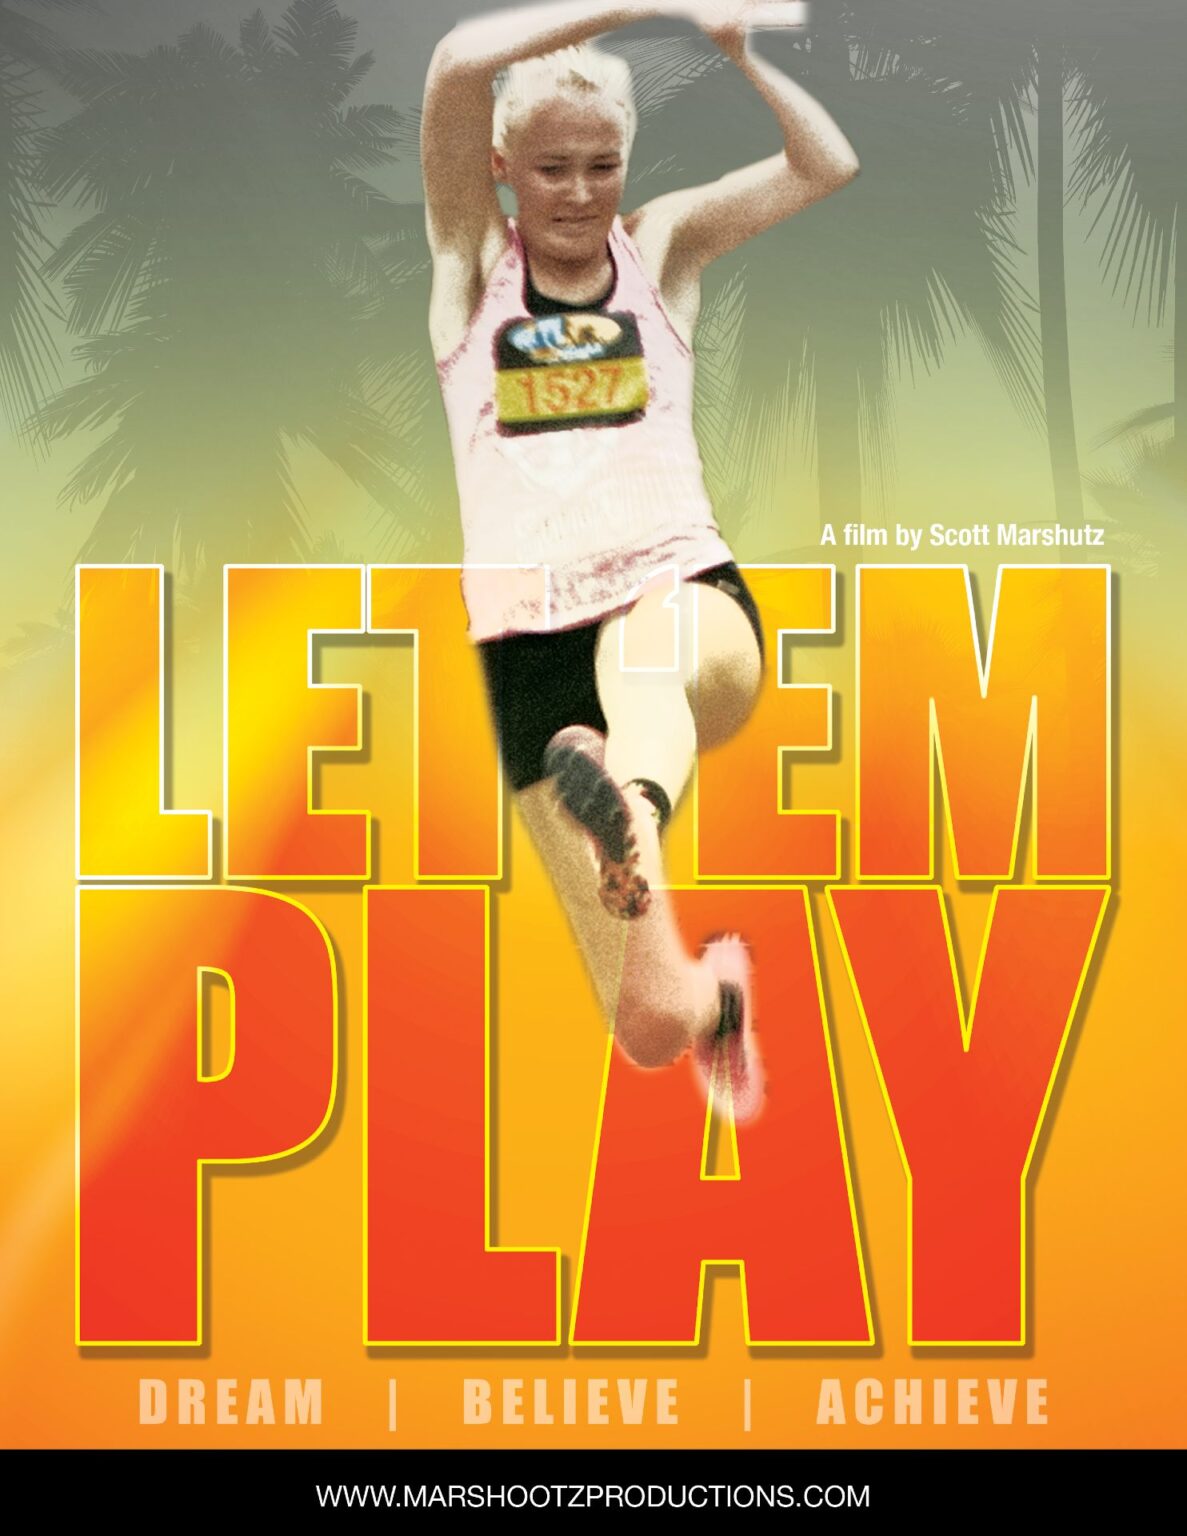 'Let 'Em Play' is the new sports documentary by director Scott Marshutz. Learn more about the doc and Marshutz here.